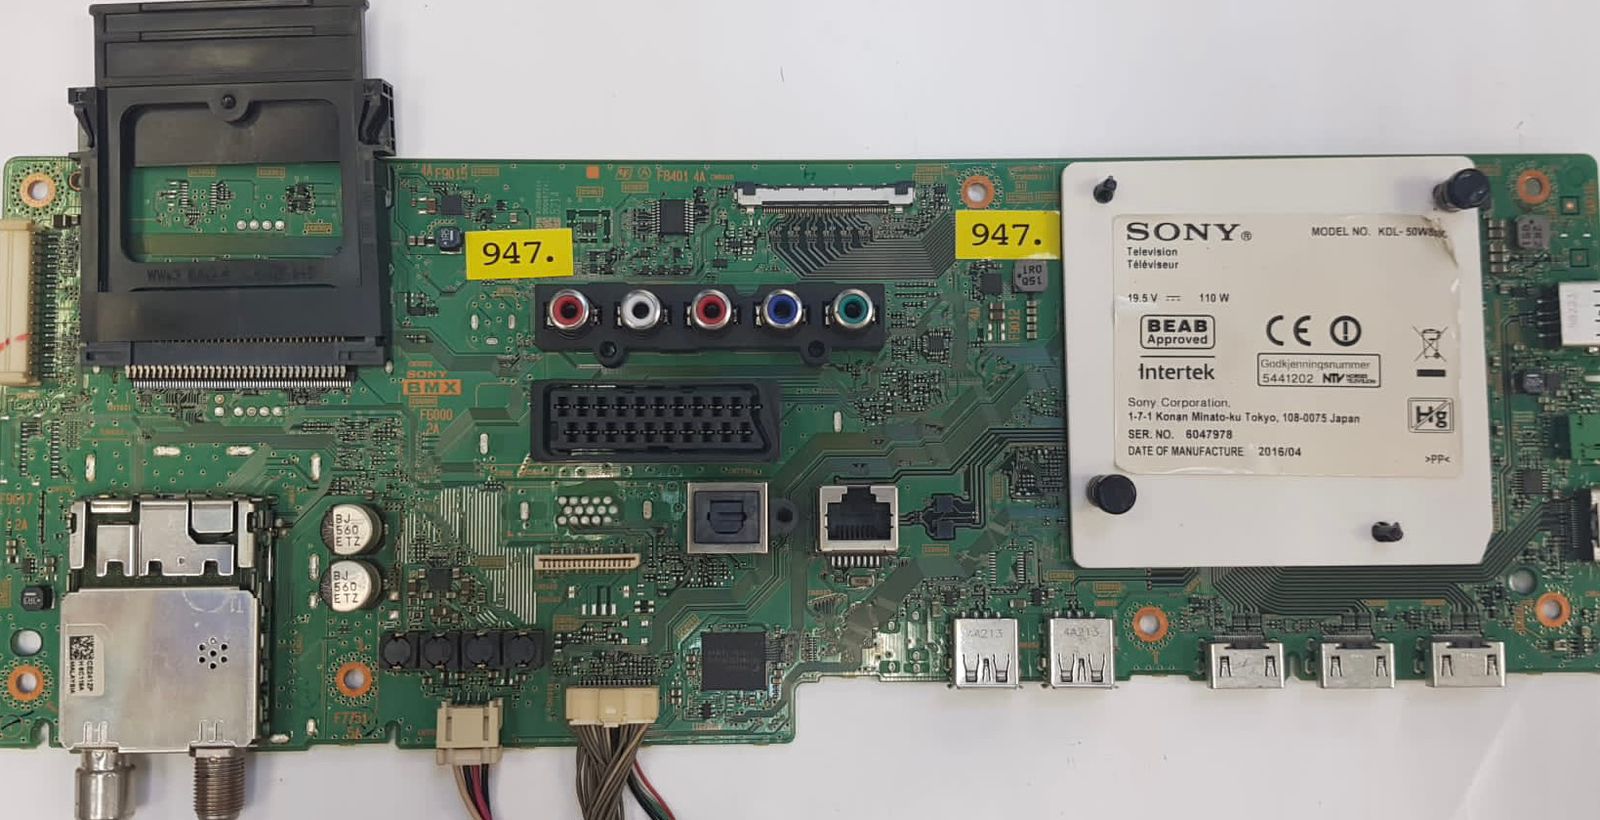 MAINBOARD SONY KDL-50W805C 1-893-880-11(173525511) A2069641A0004671V15214 ,  6047978, A2069641A 0021597V1 5214 (Gbr) PositionNummer:KT63-947